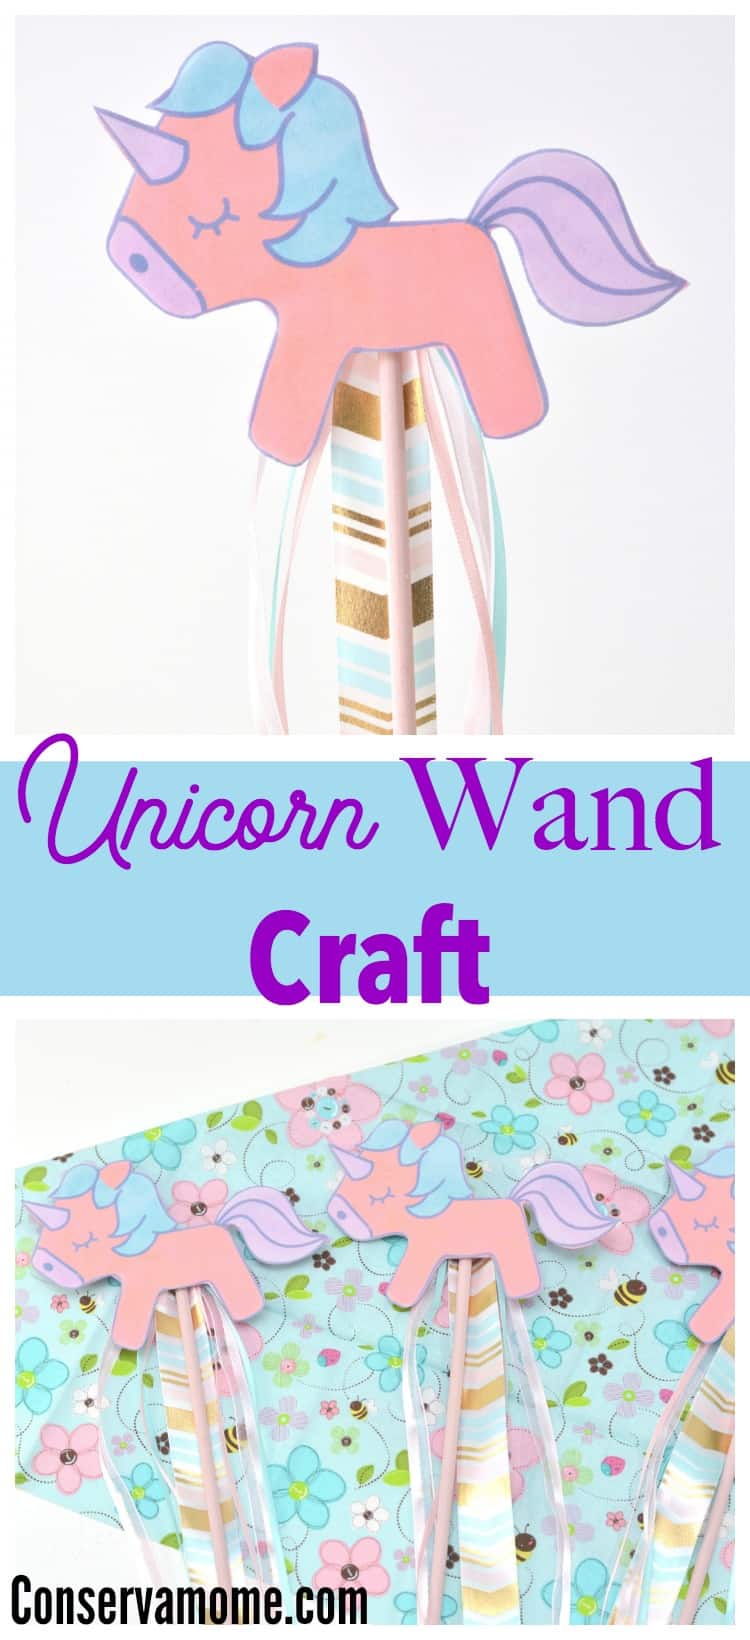 Looking for a fun Unicorn craft idea? Here's the perfect Unicorn Wand craft. This easy to make wand will bring hours of fun and enjoyment! 